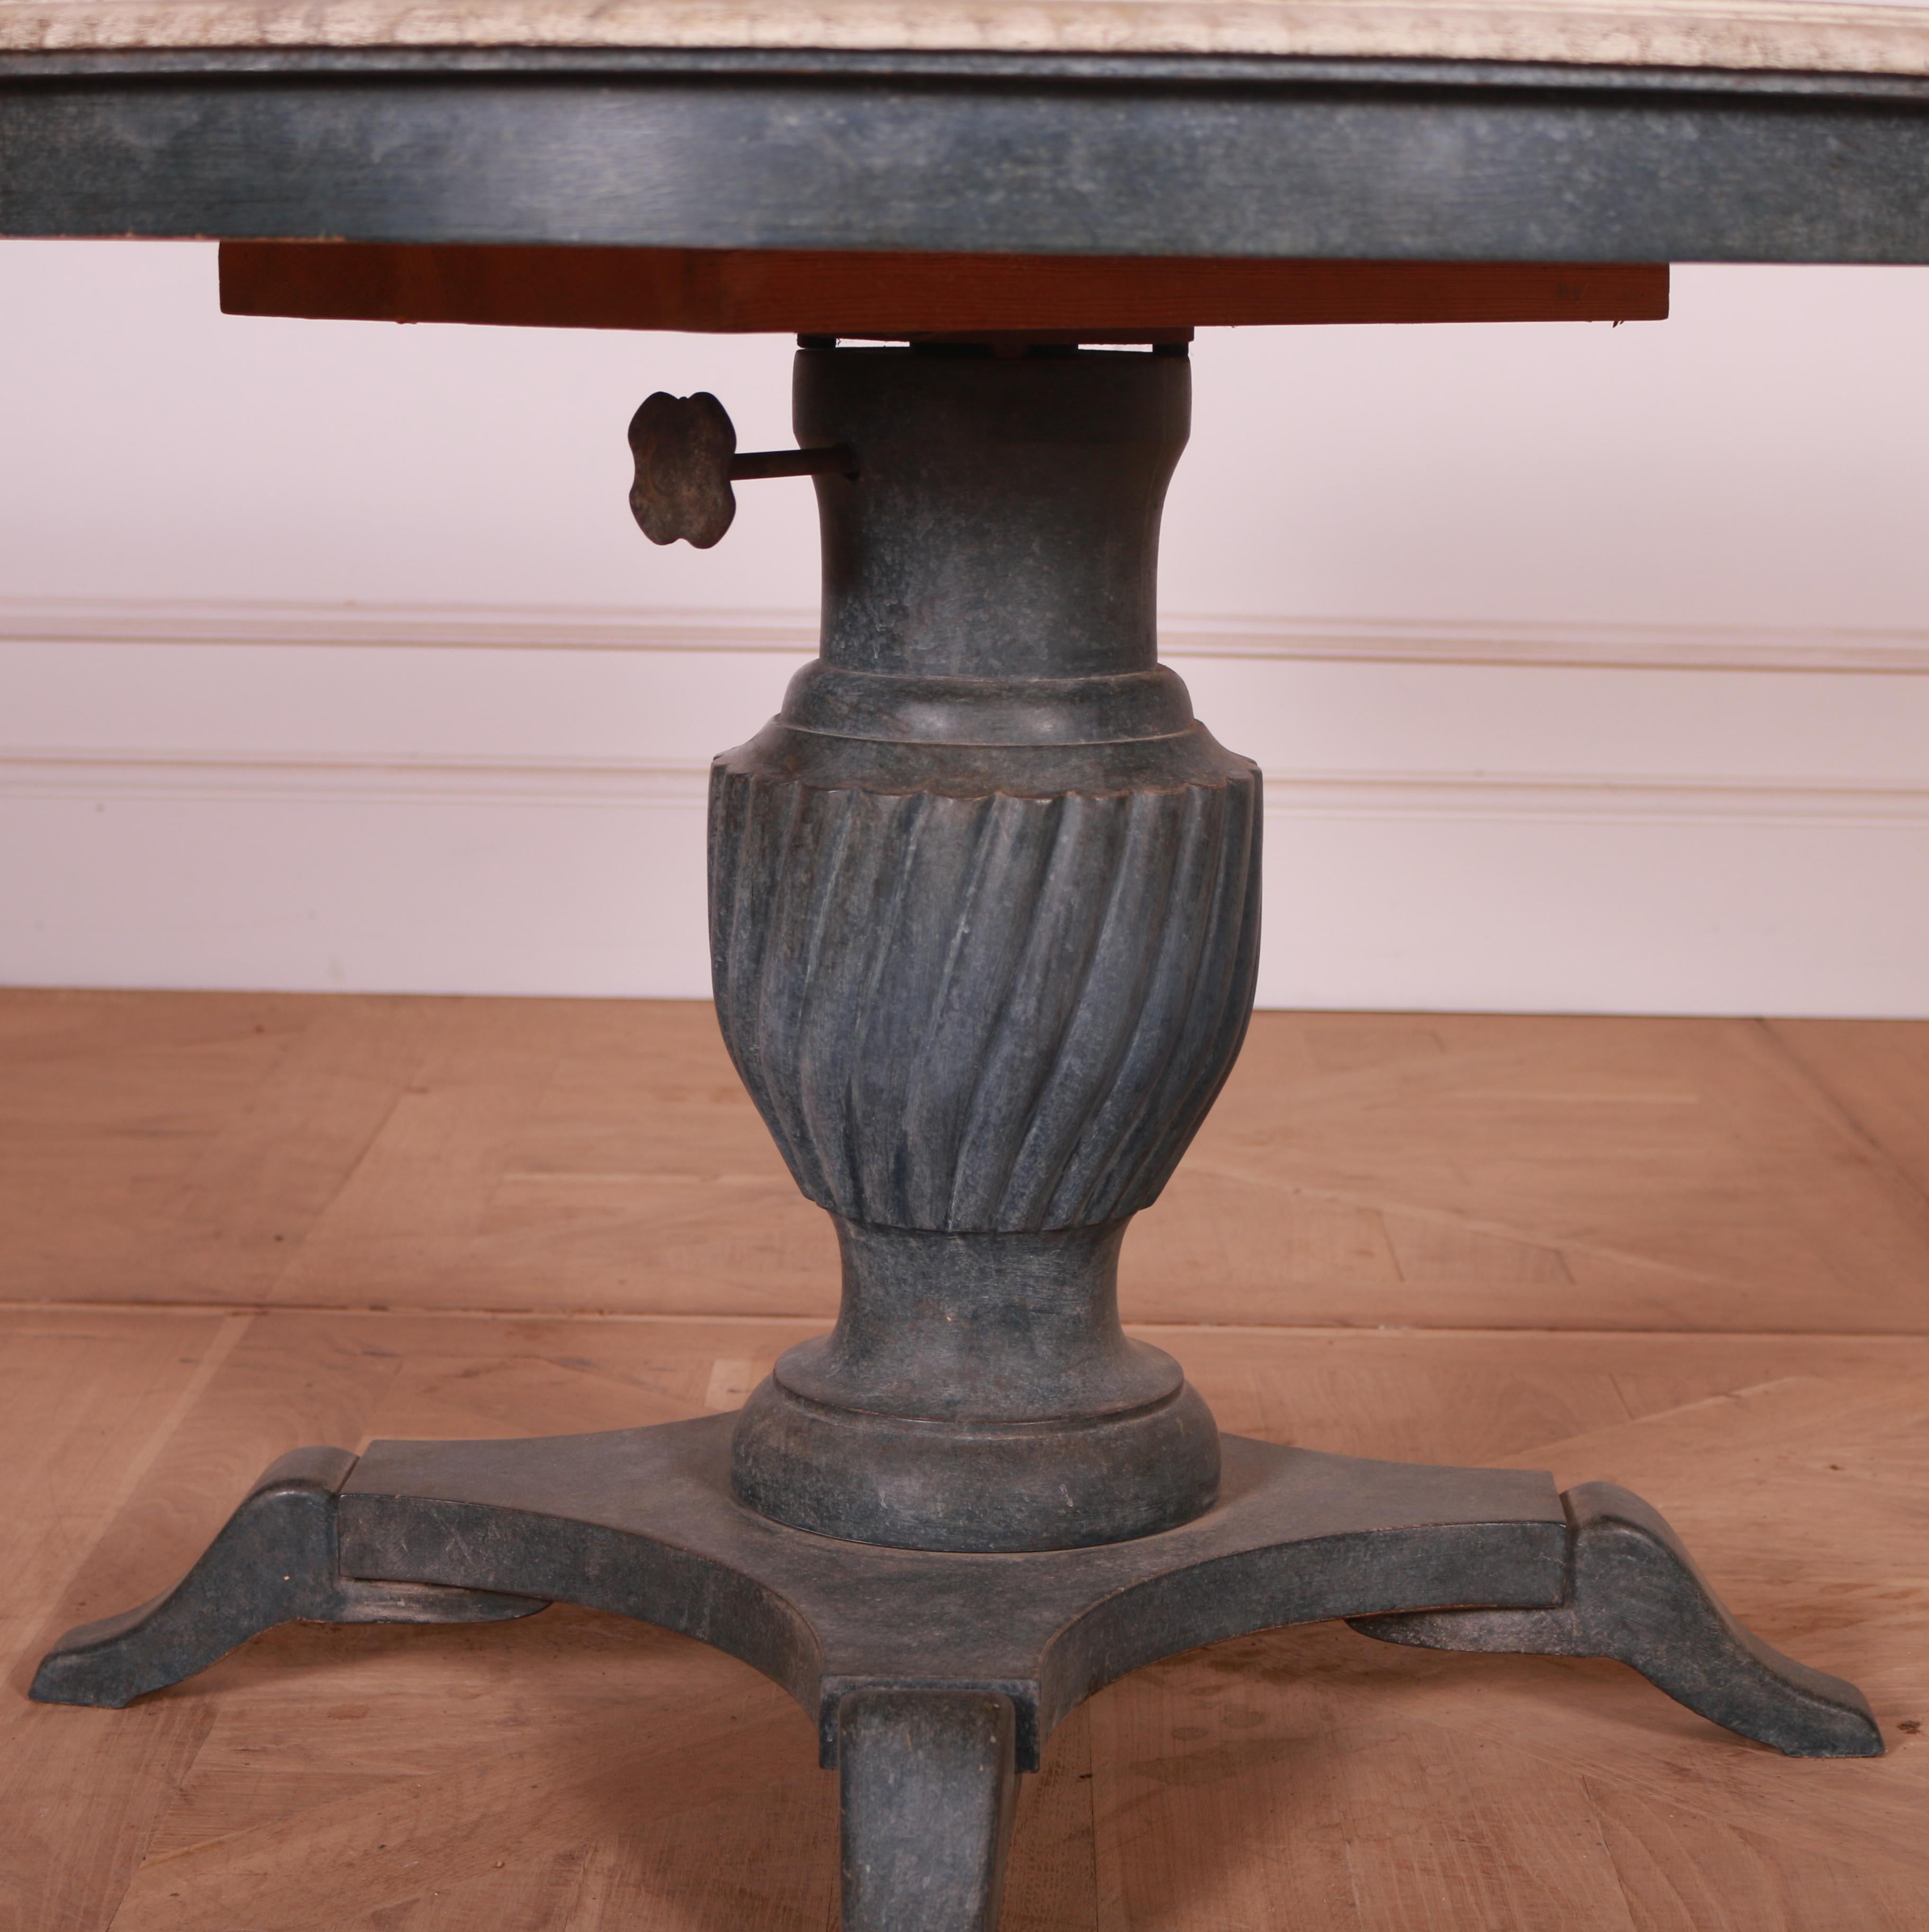 Unusual late 19th C French painted oak centre table. Adjustable height using rotating table top mechanism. 1890.

Table at lowest height is 24.5